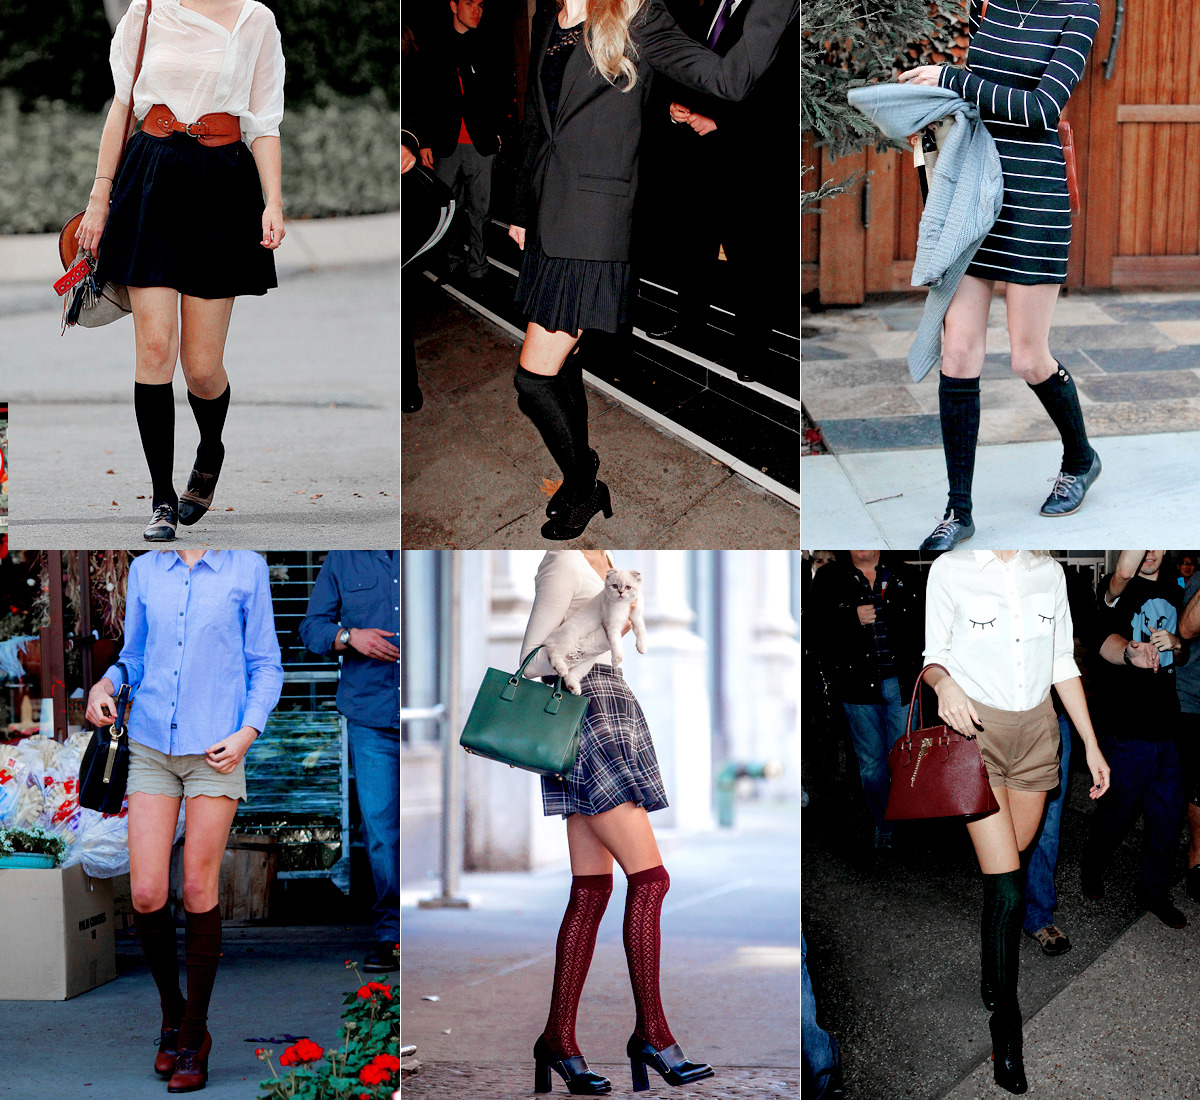 Taylor Swift Style — Taylor Swift Style + knee high socks August 13